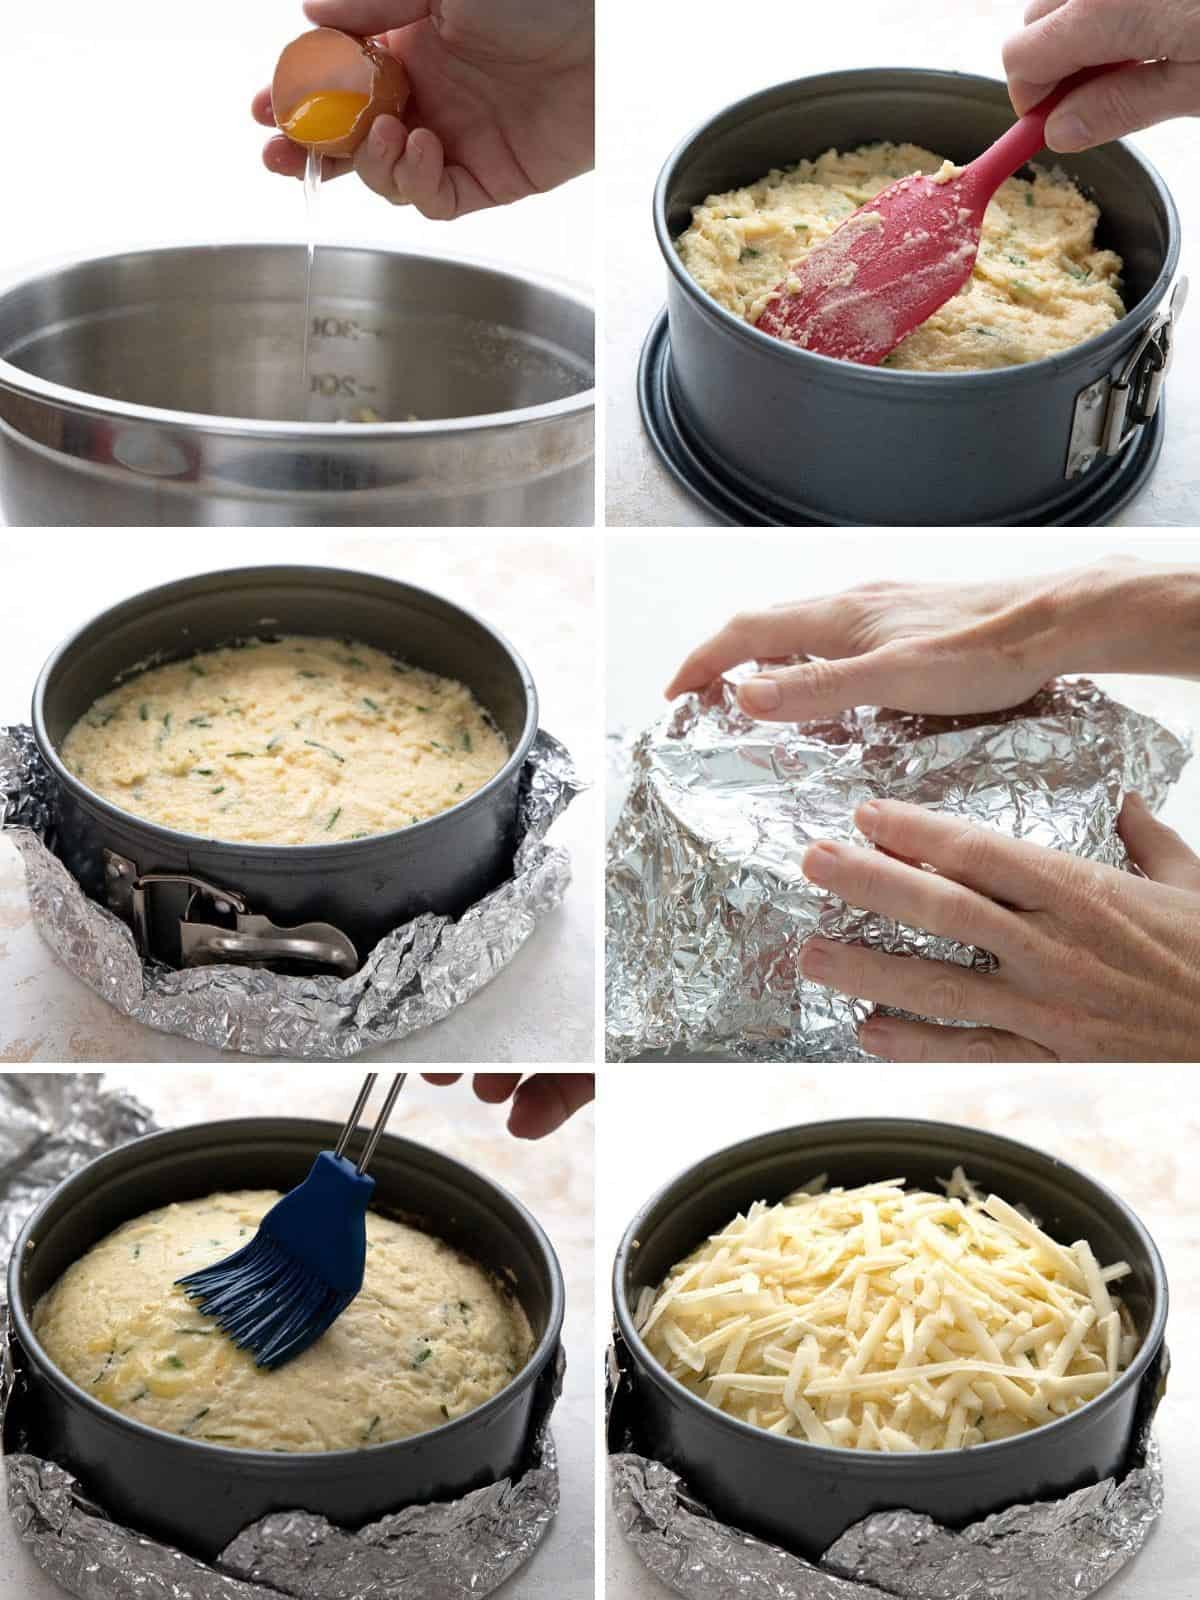 A collage of 6 photos showing the steps for making instant pot cheese bread.